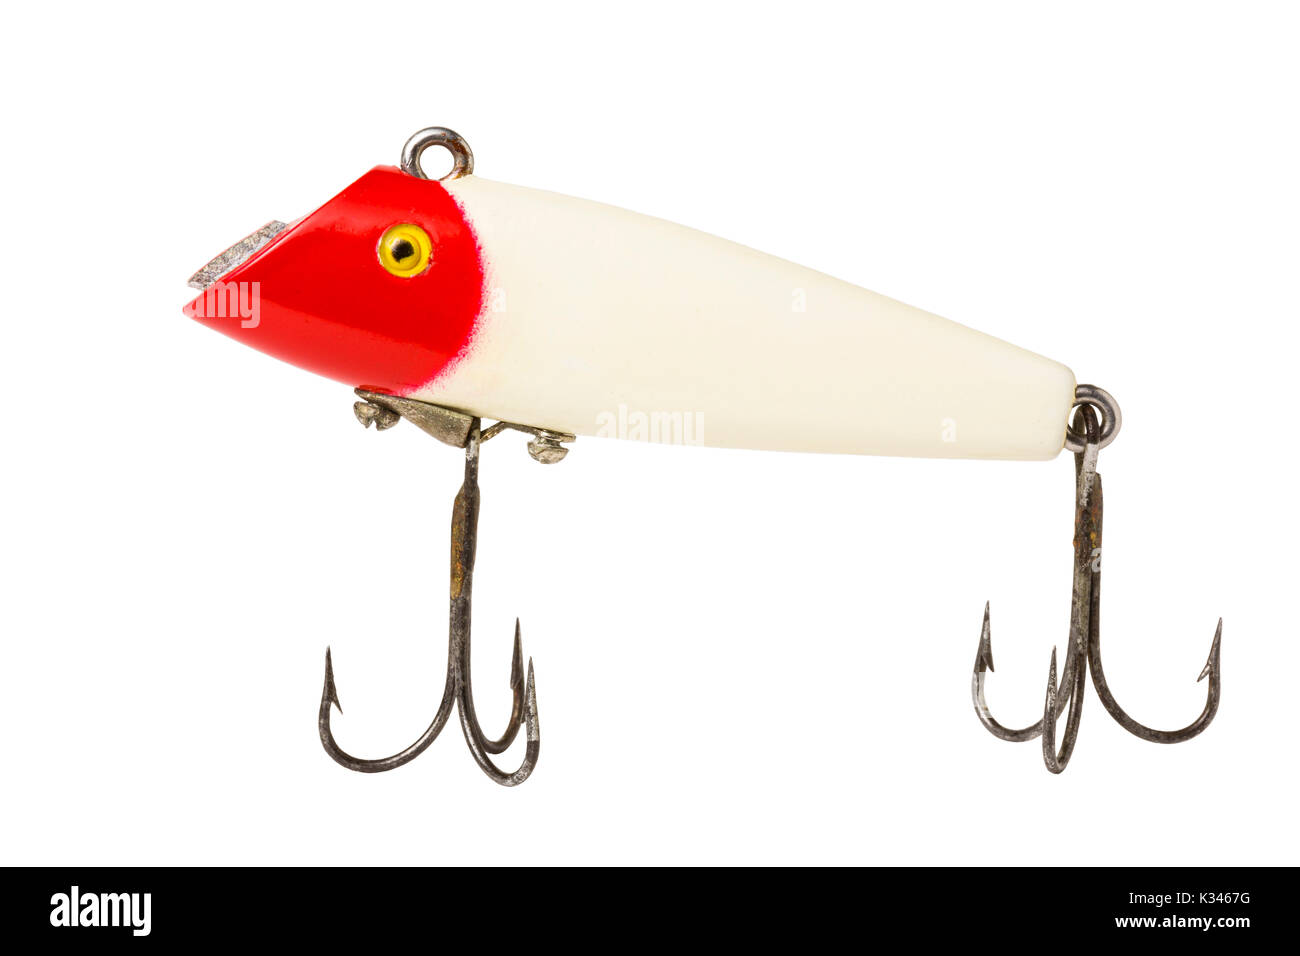 Old Fishing Lure Stock Photo